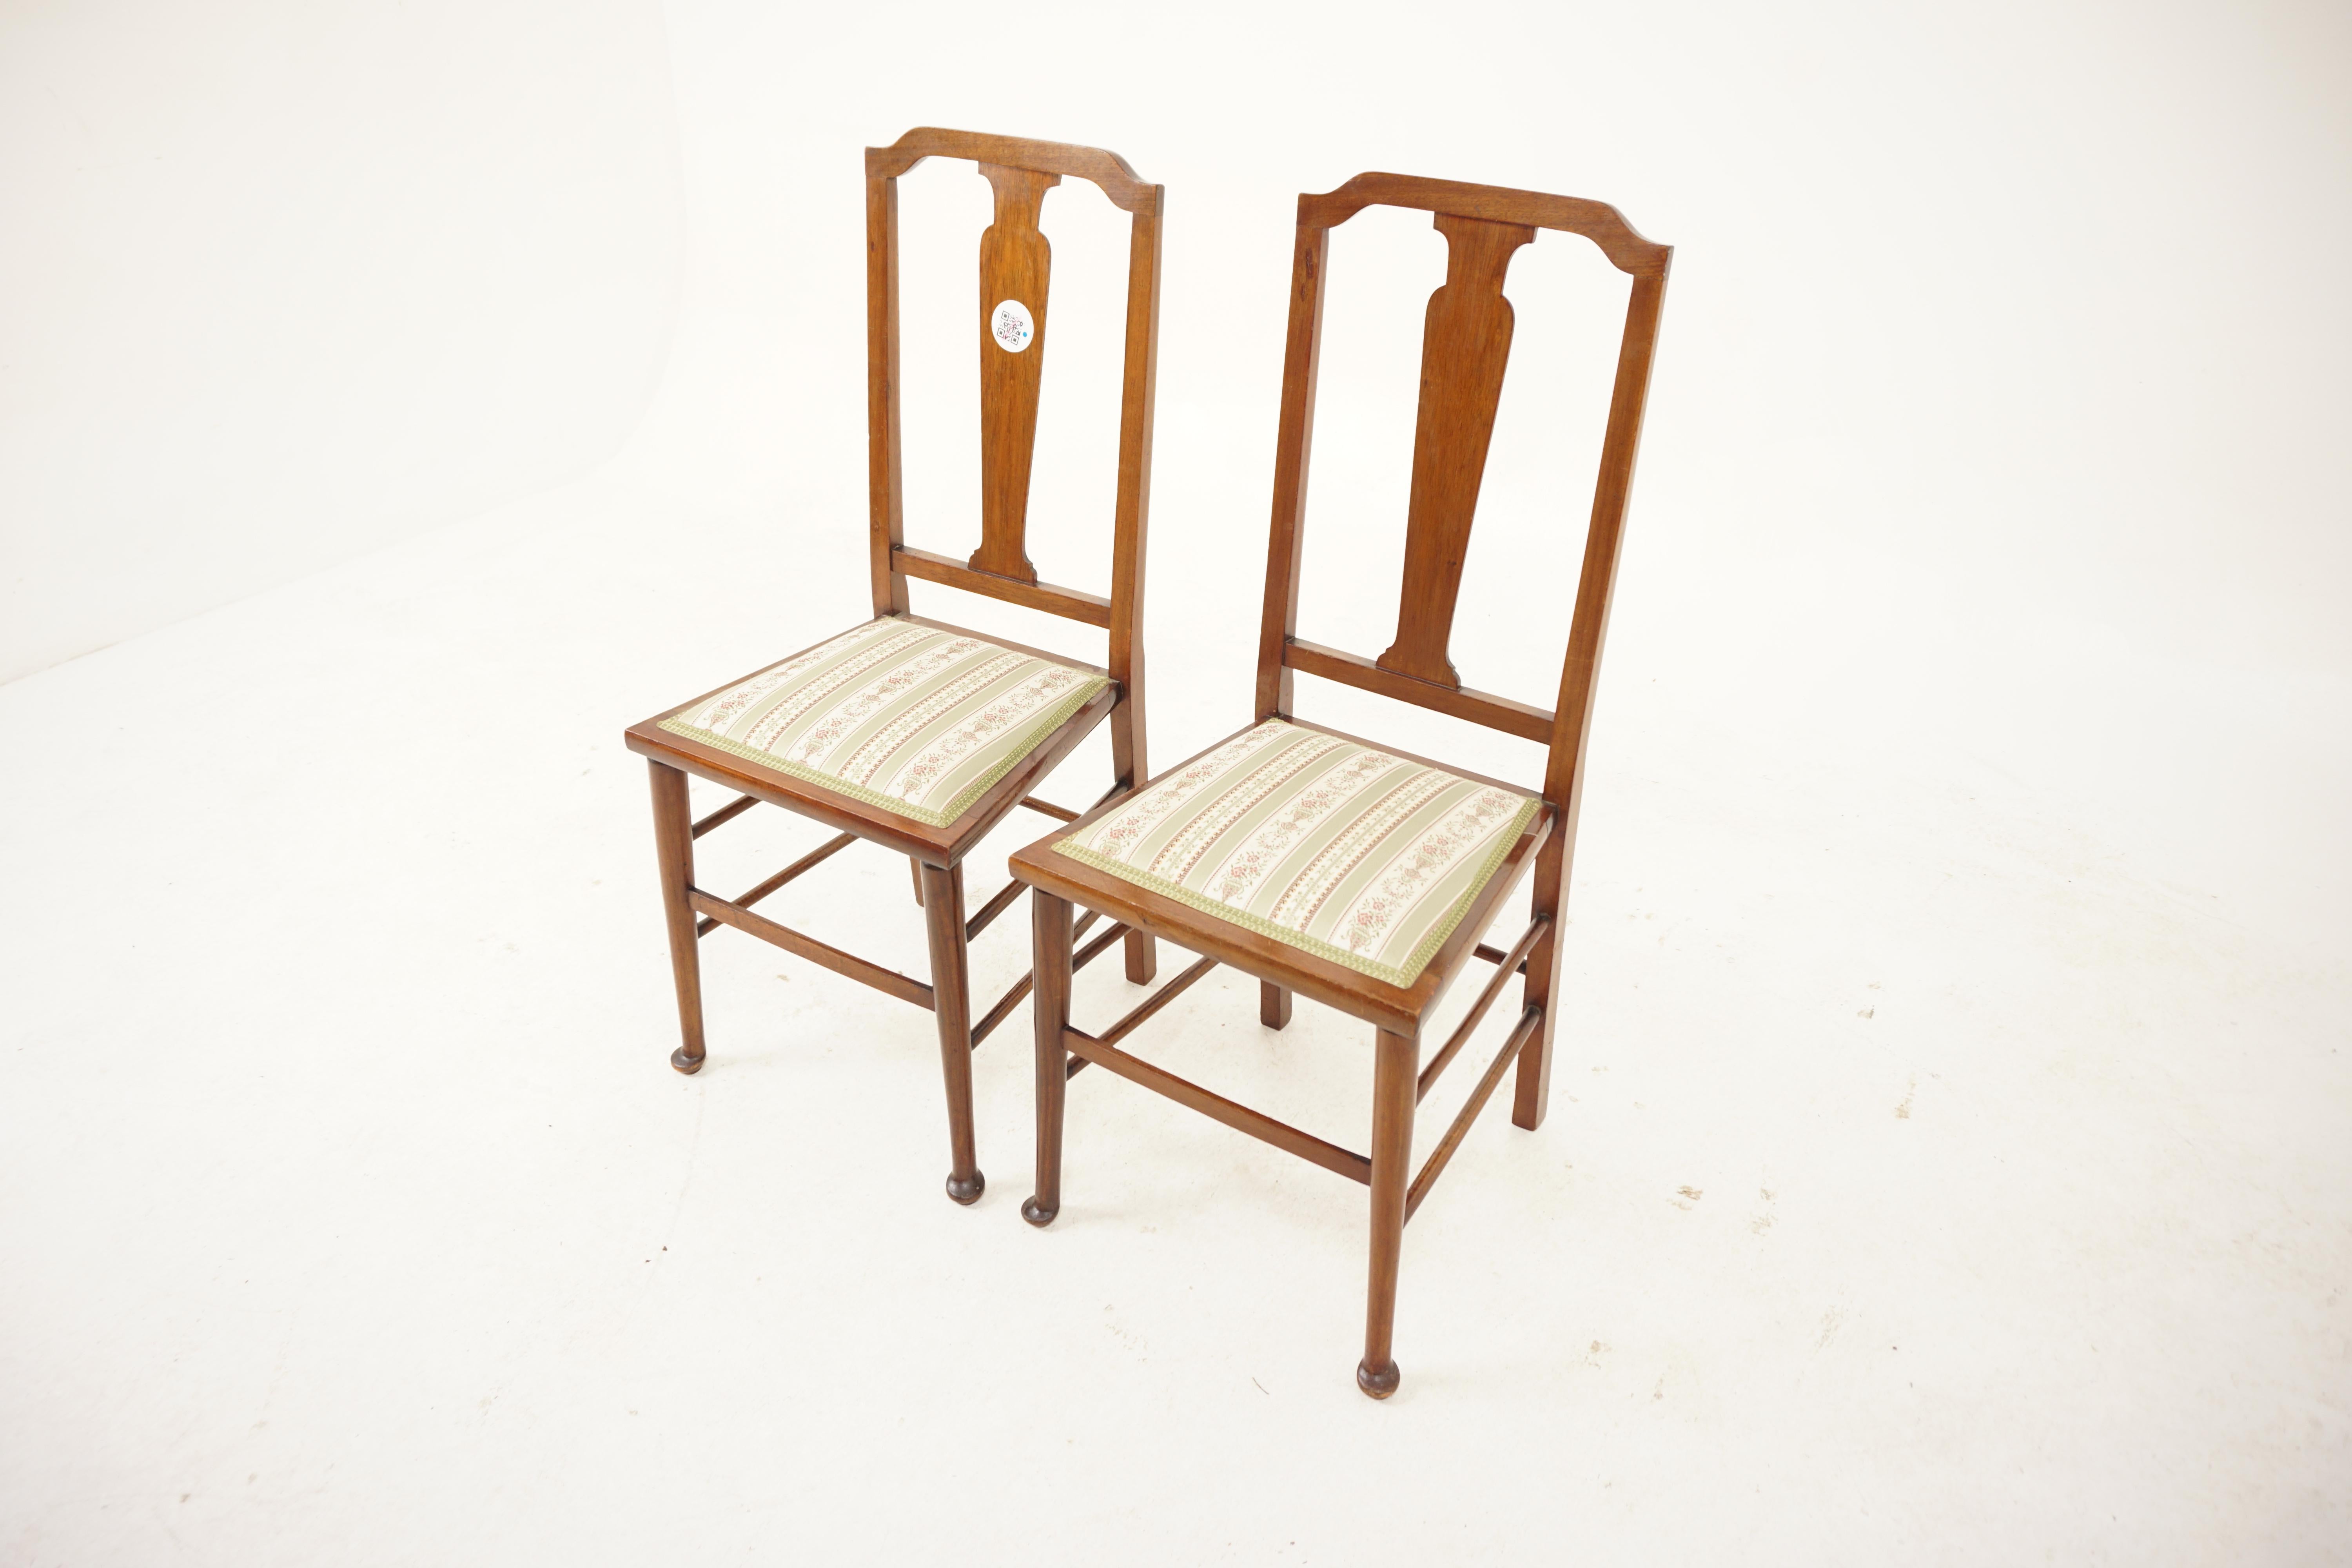 Pair of Edwardian walnut bedroom chairs, Scotland 1910, H067

Scotland 1910
Solid Walnut
Original Finish
Shaped top rail
Center shaped splat to the back
Newly upholstered seats
Standing on turned legs to the front
The chairs have six cross